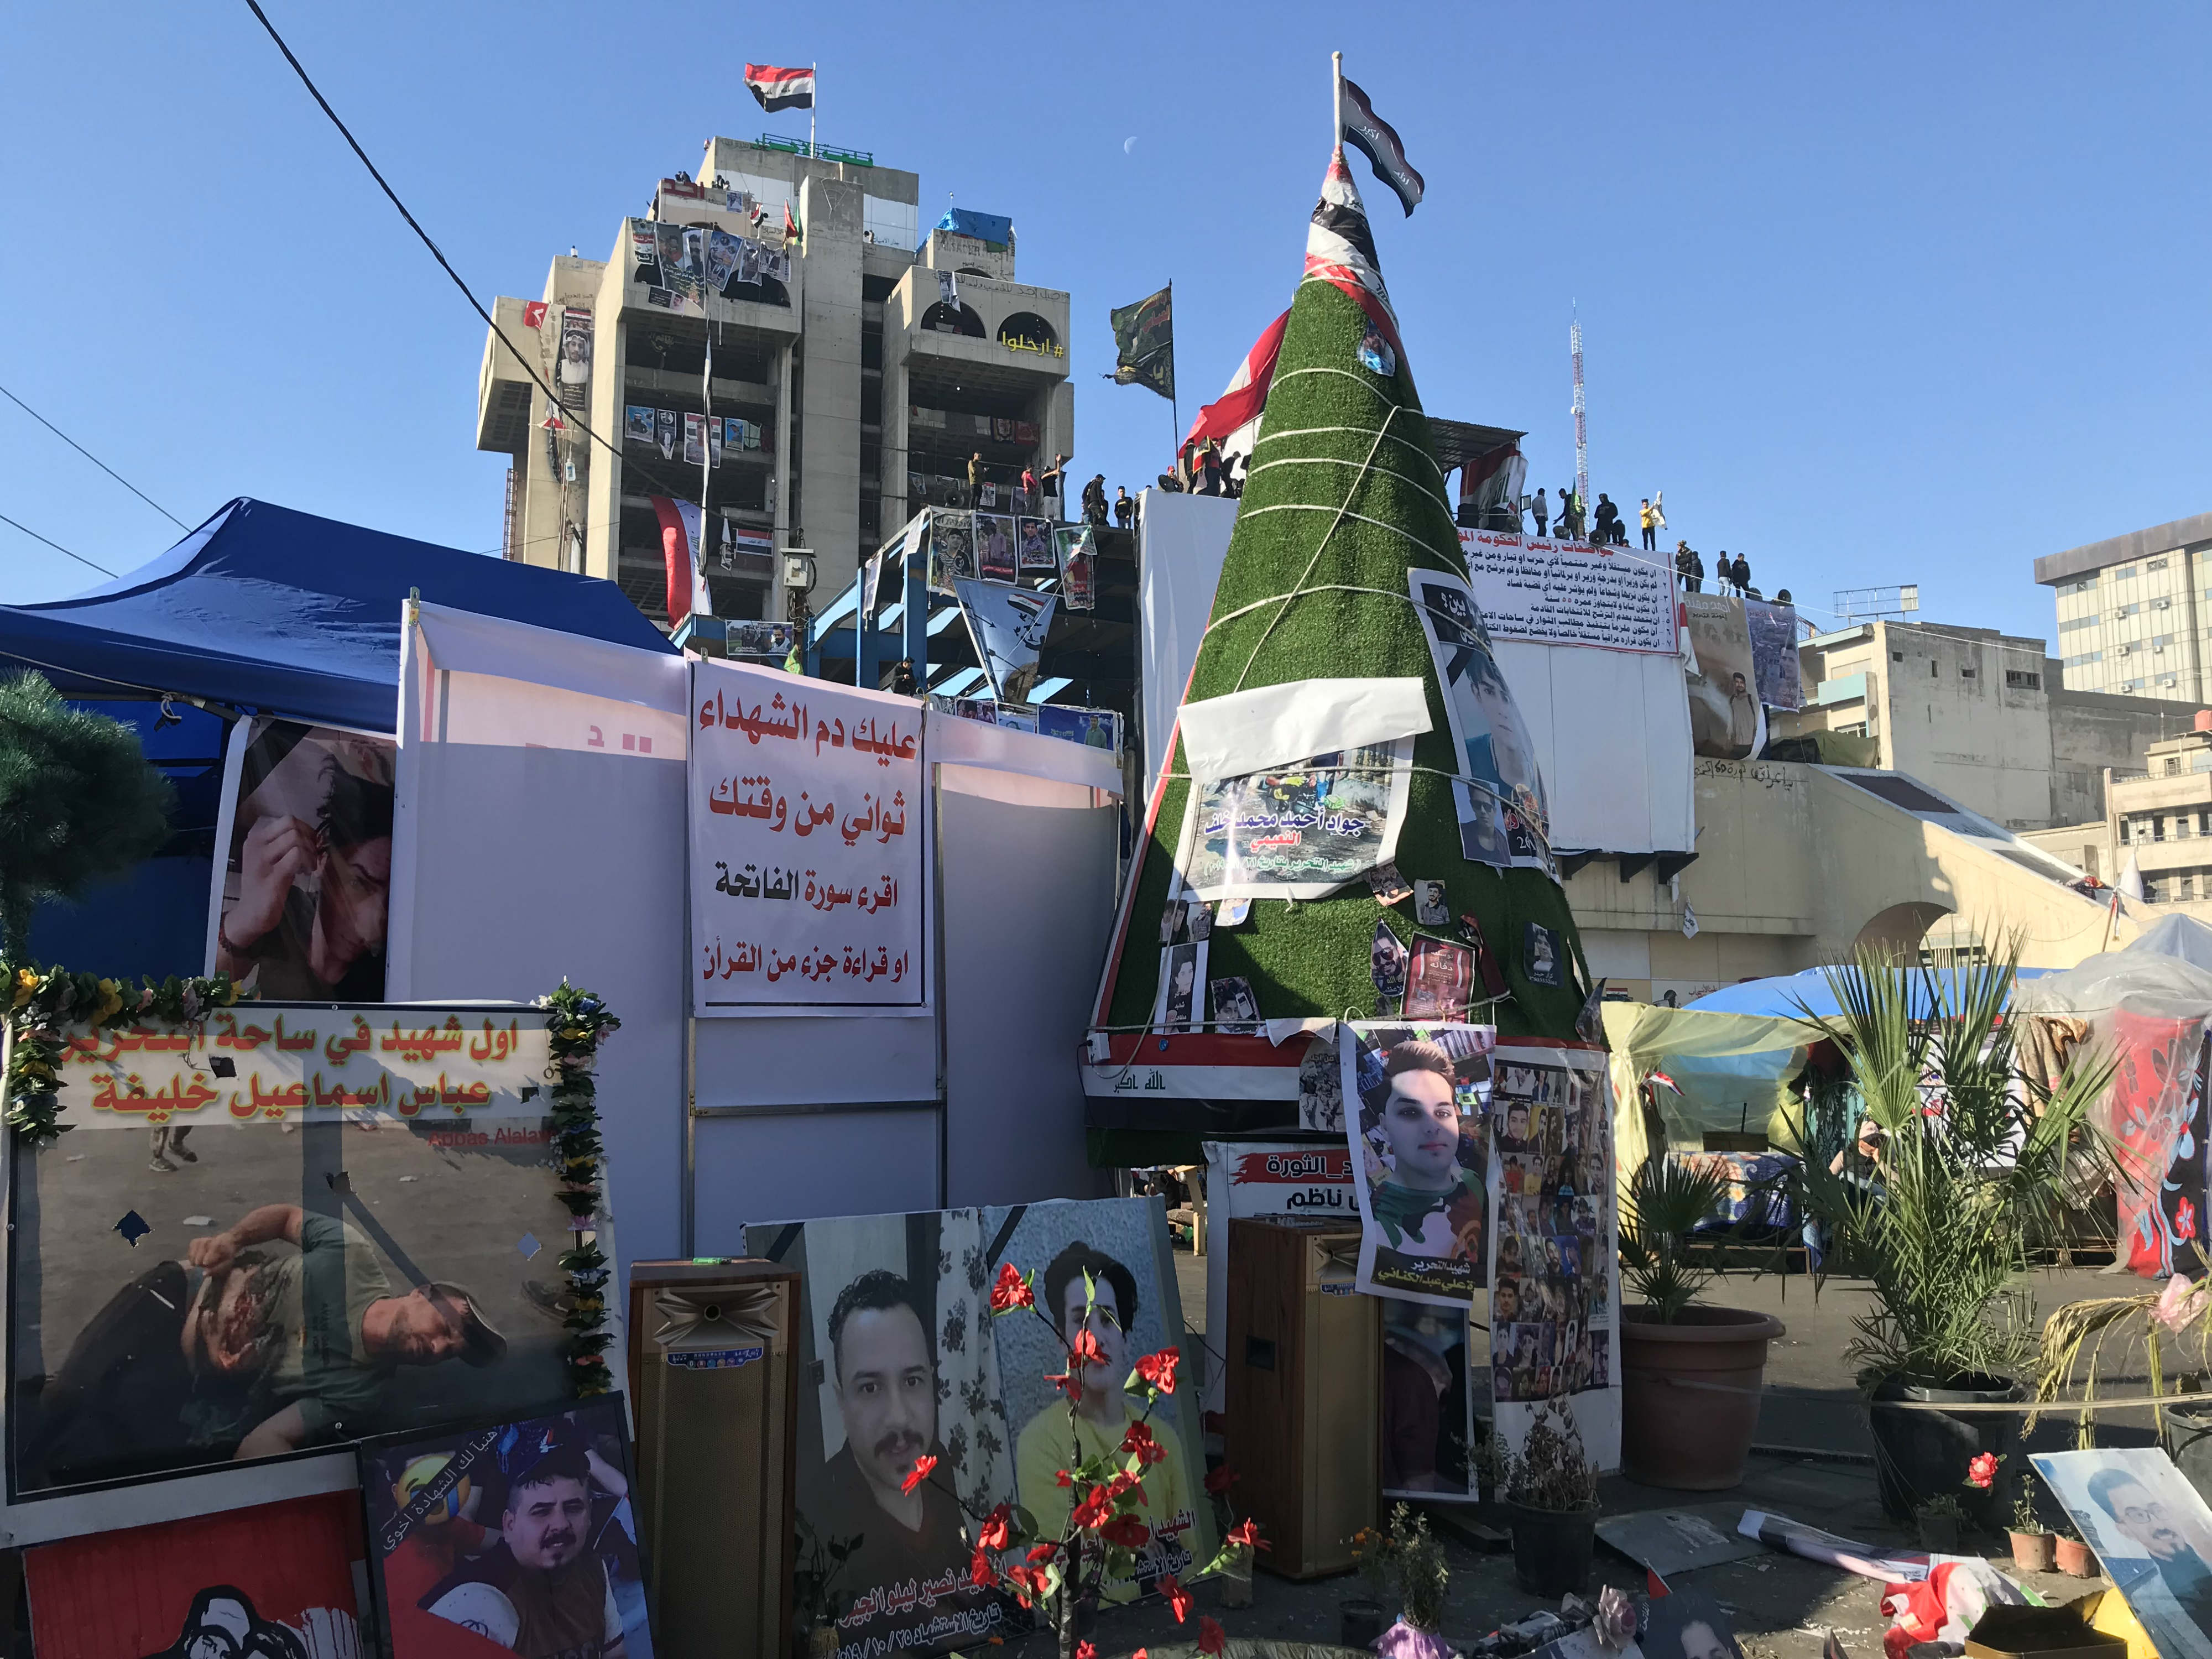 Protesters in Tahrir Square put up pictures of martyrs and decorated them with lights (MEE/Azhar Al-Rubaie)